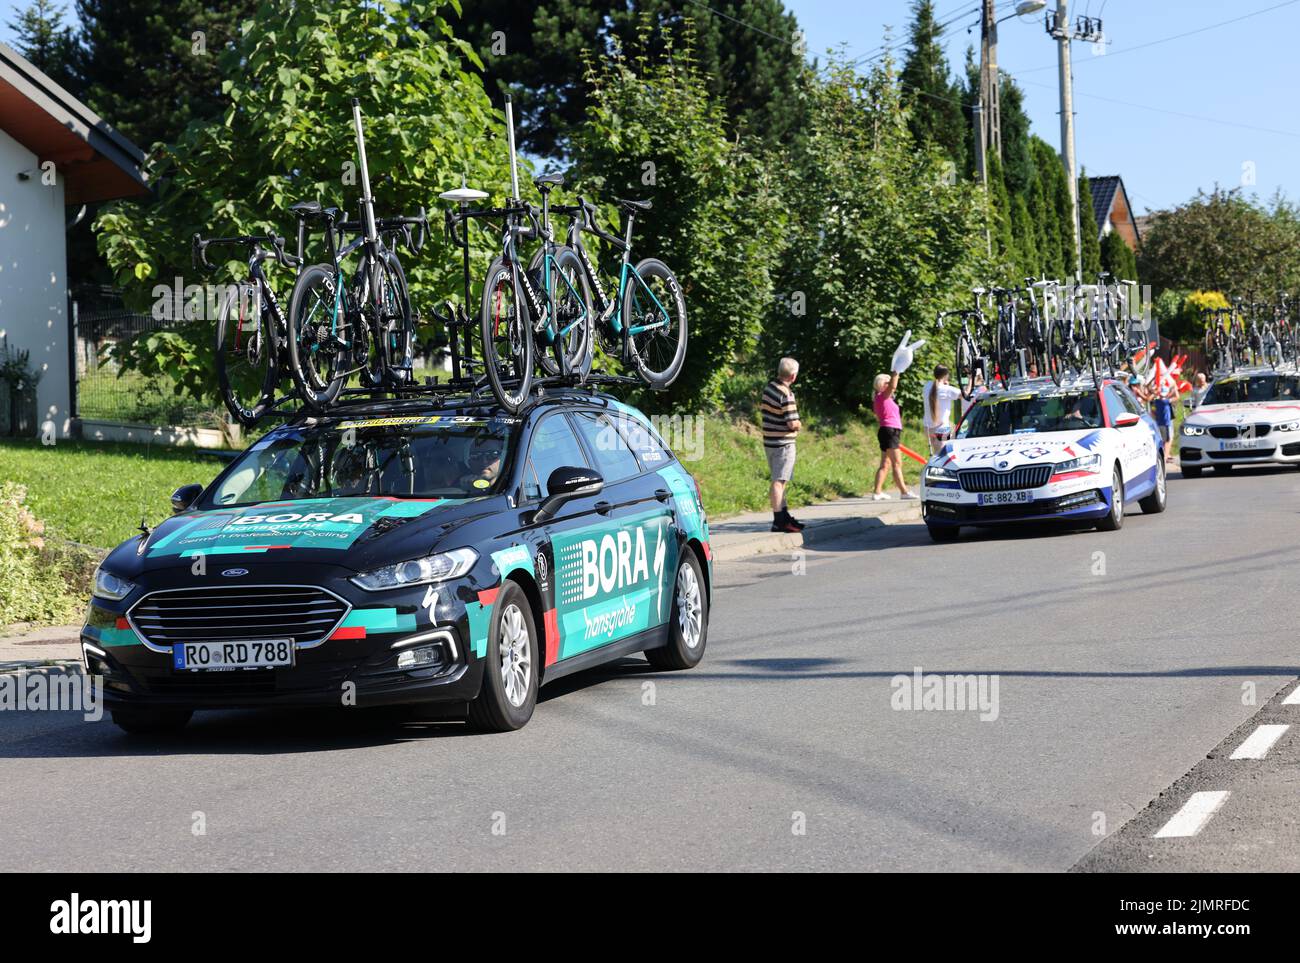 Krakow, Poland - August 5, 2022:  Bora Hansgrohe  Team vehicle on the route of Tour de Pologne UCI – World Tour, stage 7 Skawina - Krakow. The biggest cycling event in Eastern Europe. Stock Photo